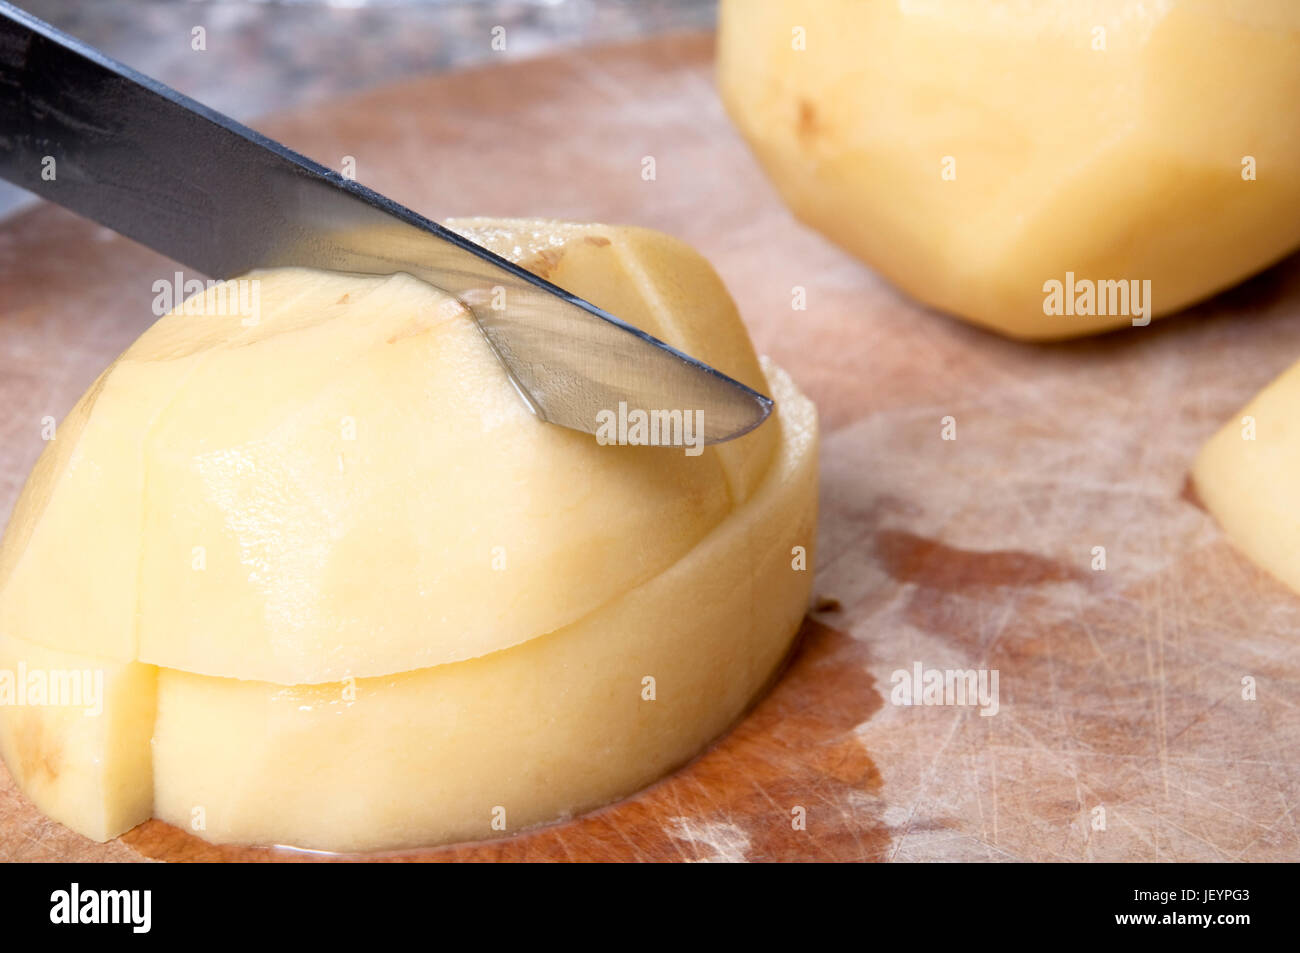 Close up action shot of potatoes being chopped on an old wooden chopping board, with visible cut marks.  Counter top visible in background. Stock Photo